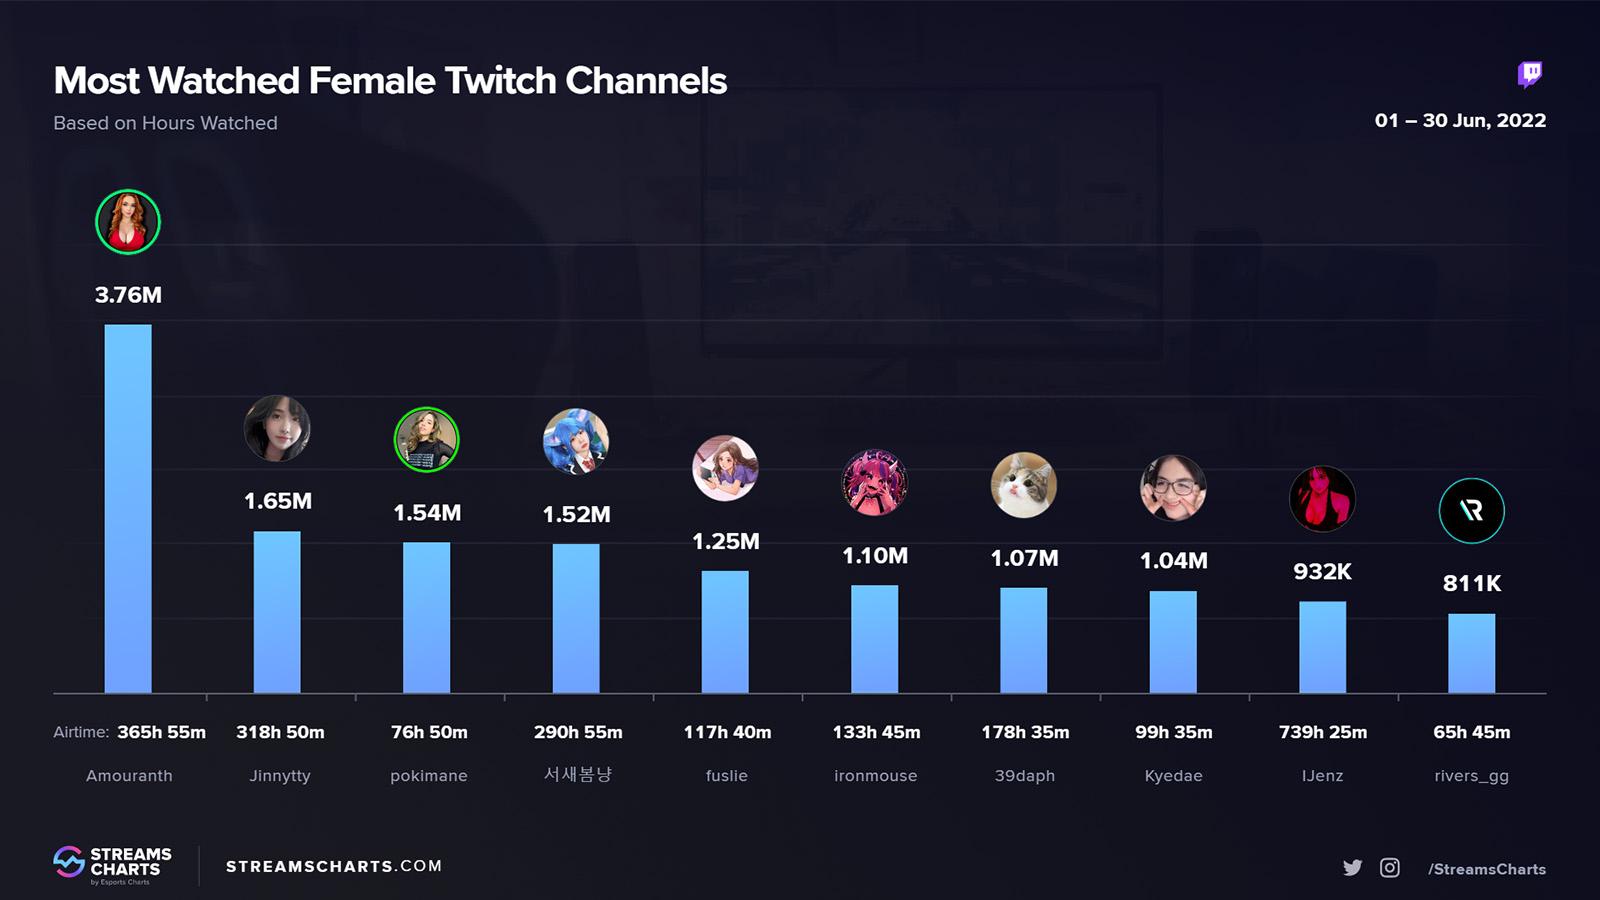 jinnytty takes second place on the most watched female twitch streamer list